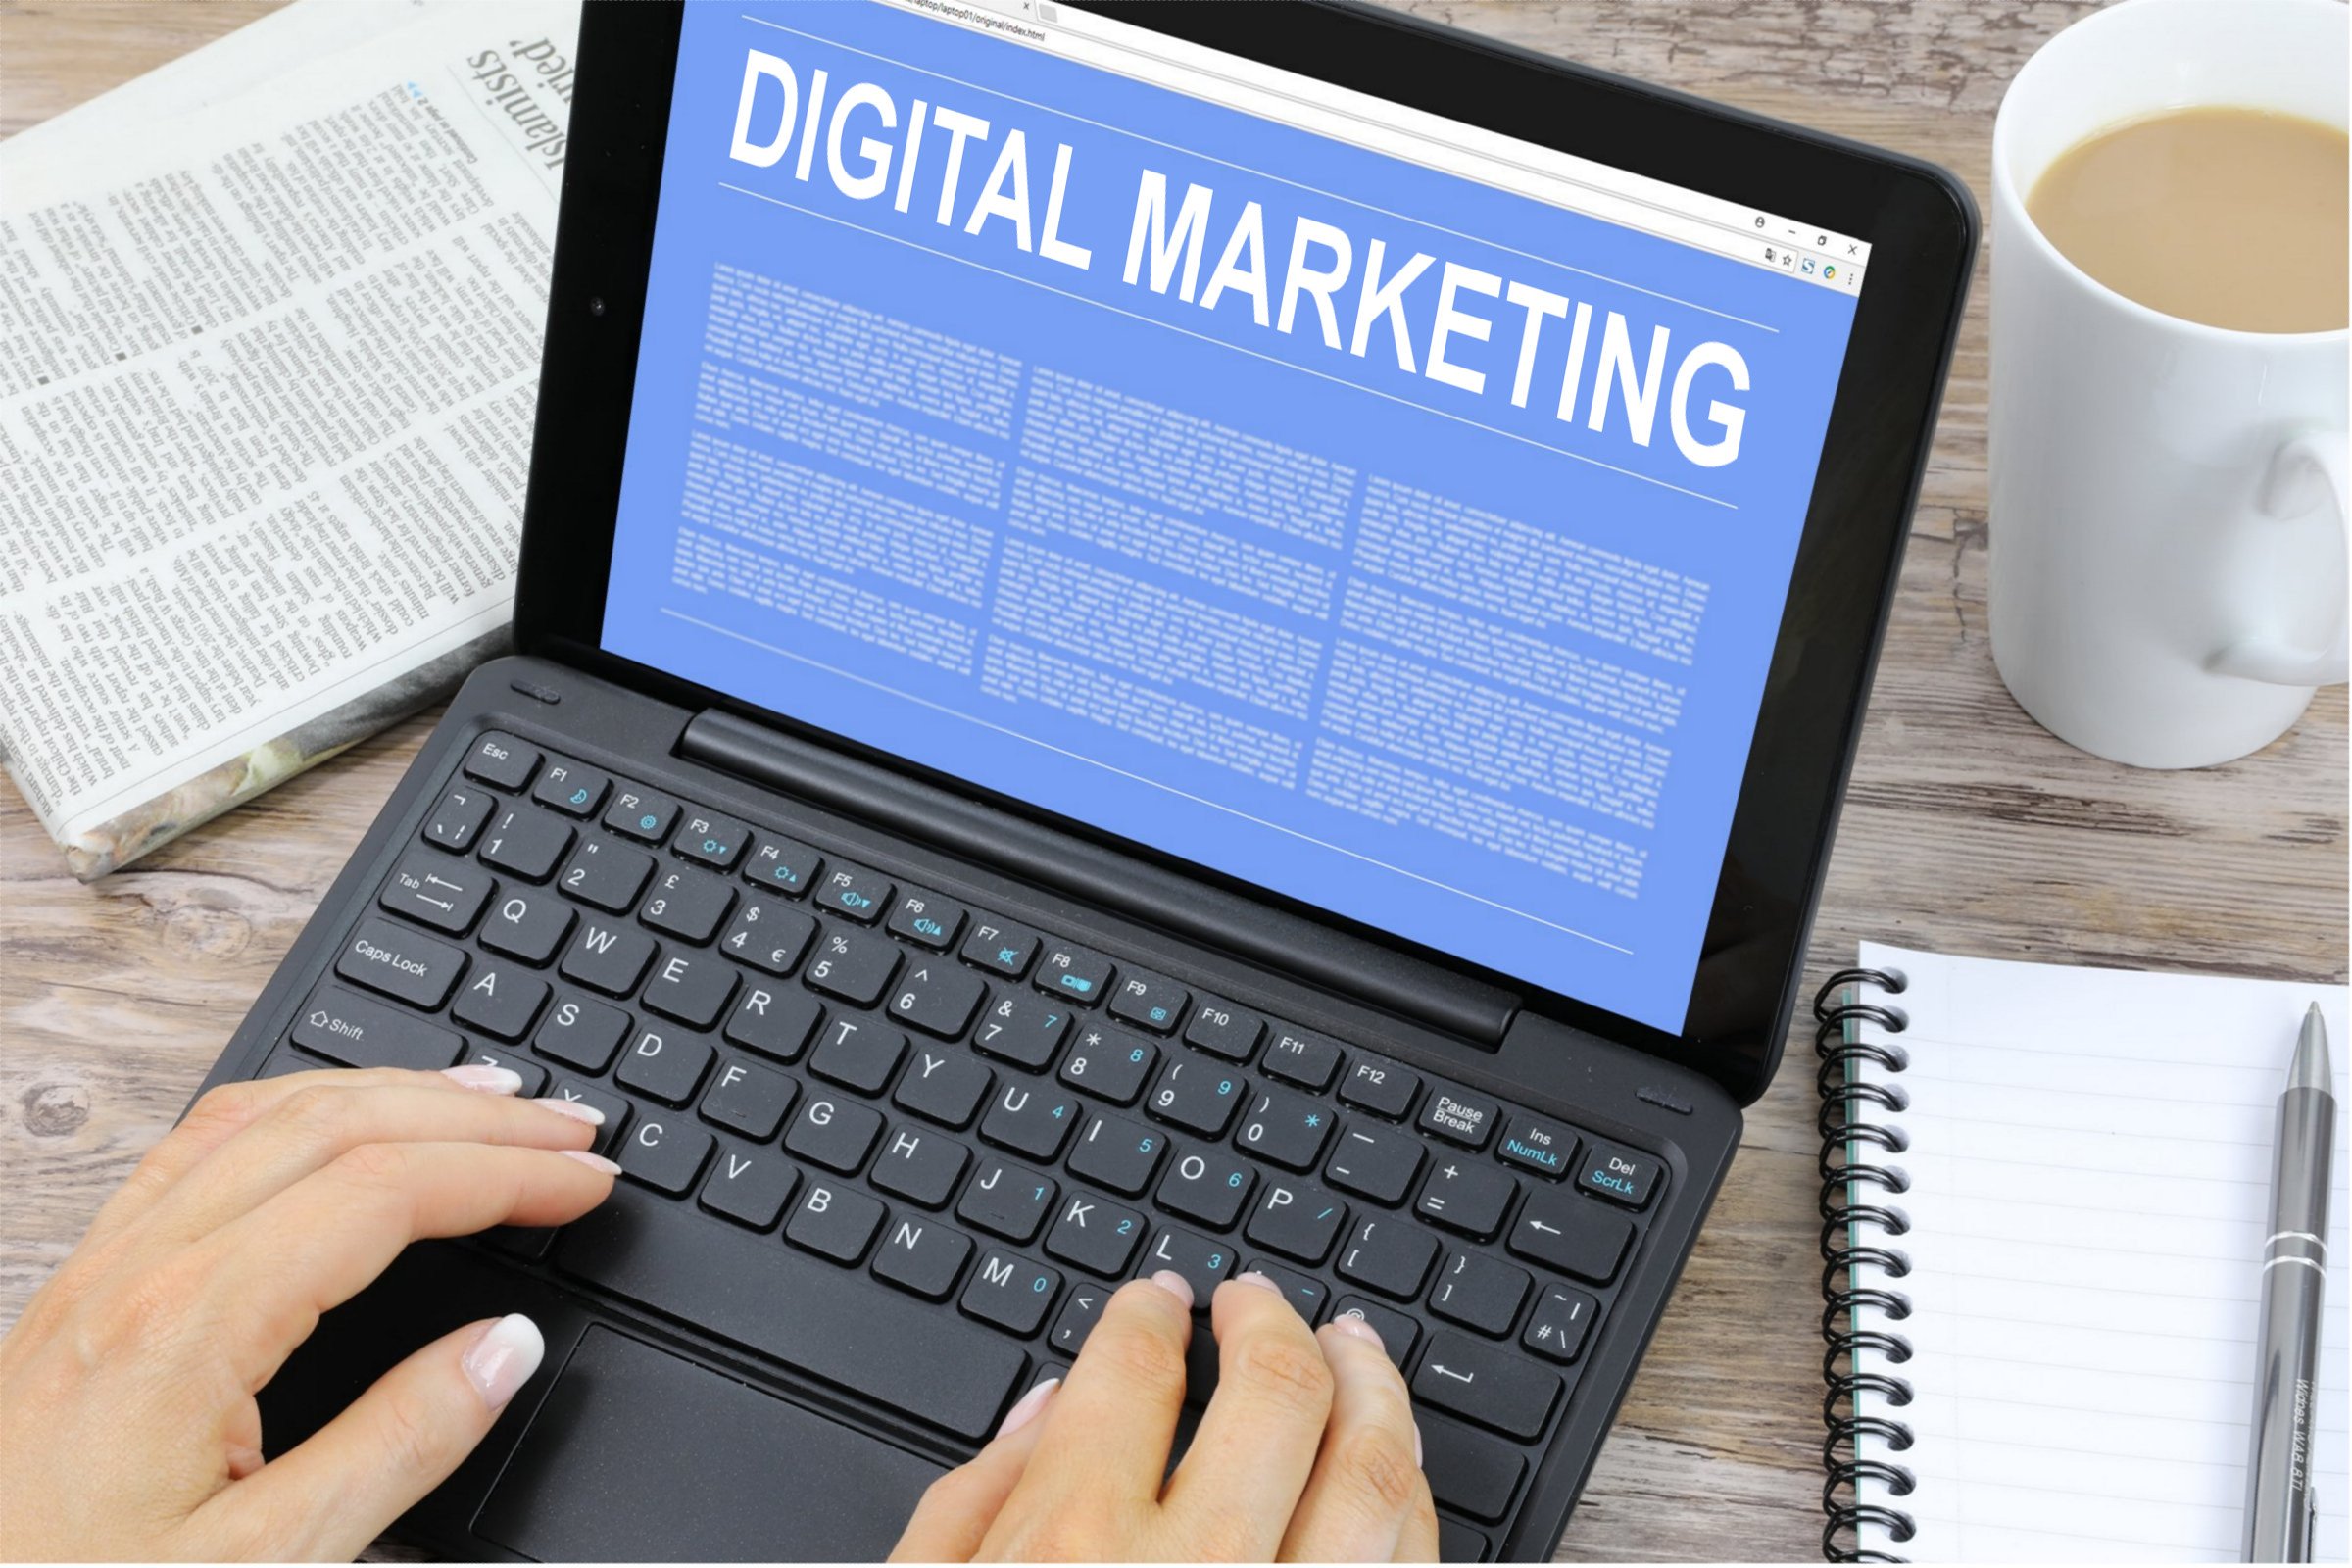 Digital Marketing - Free of Charge Creative Commons Laptop image